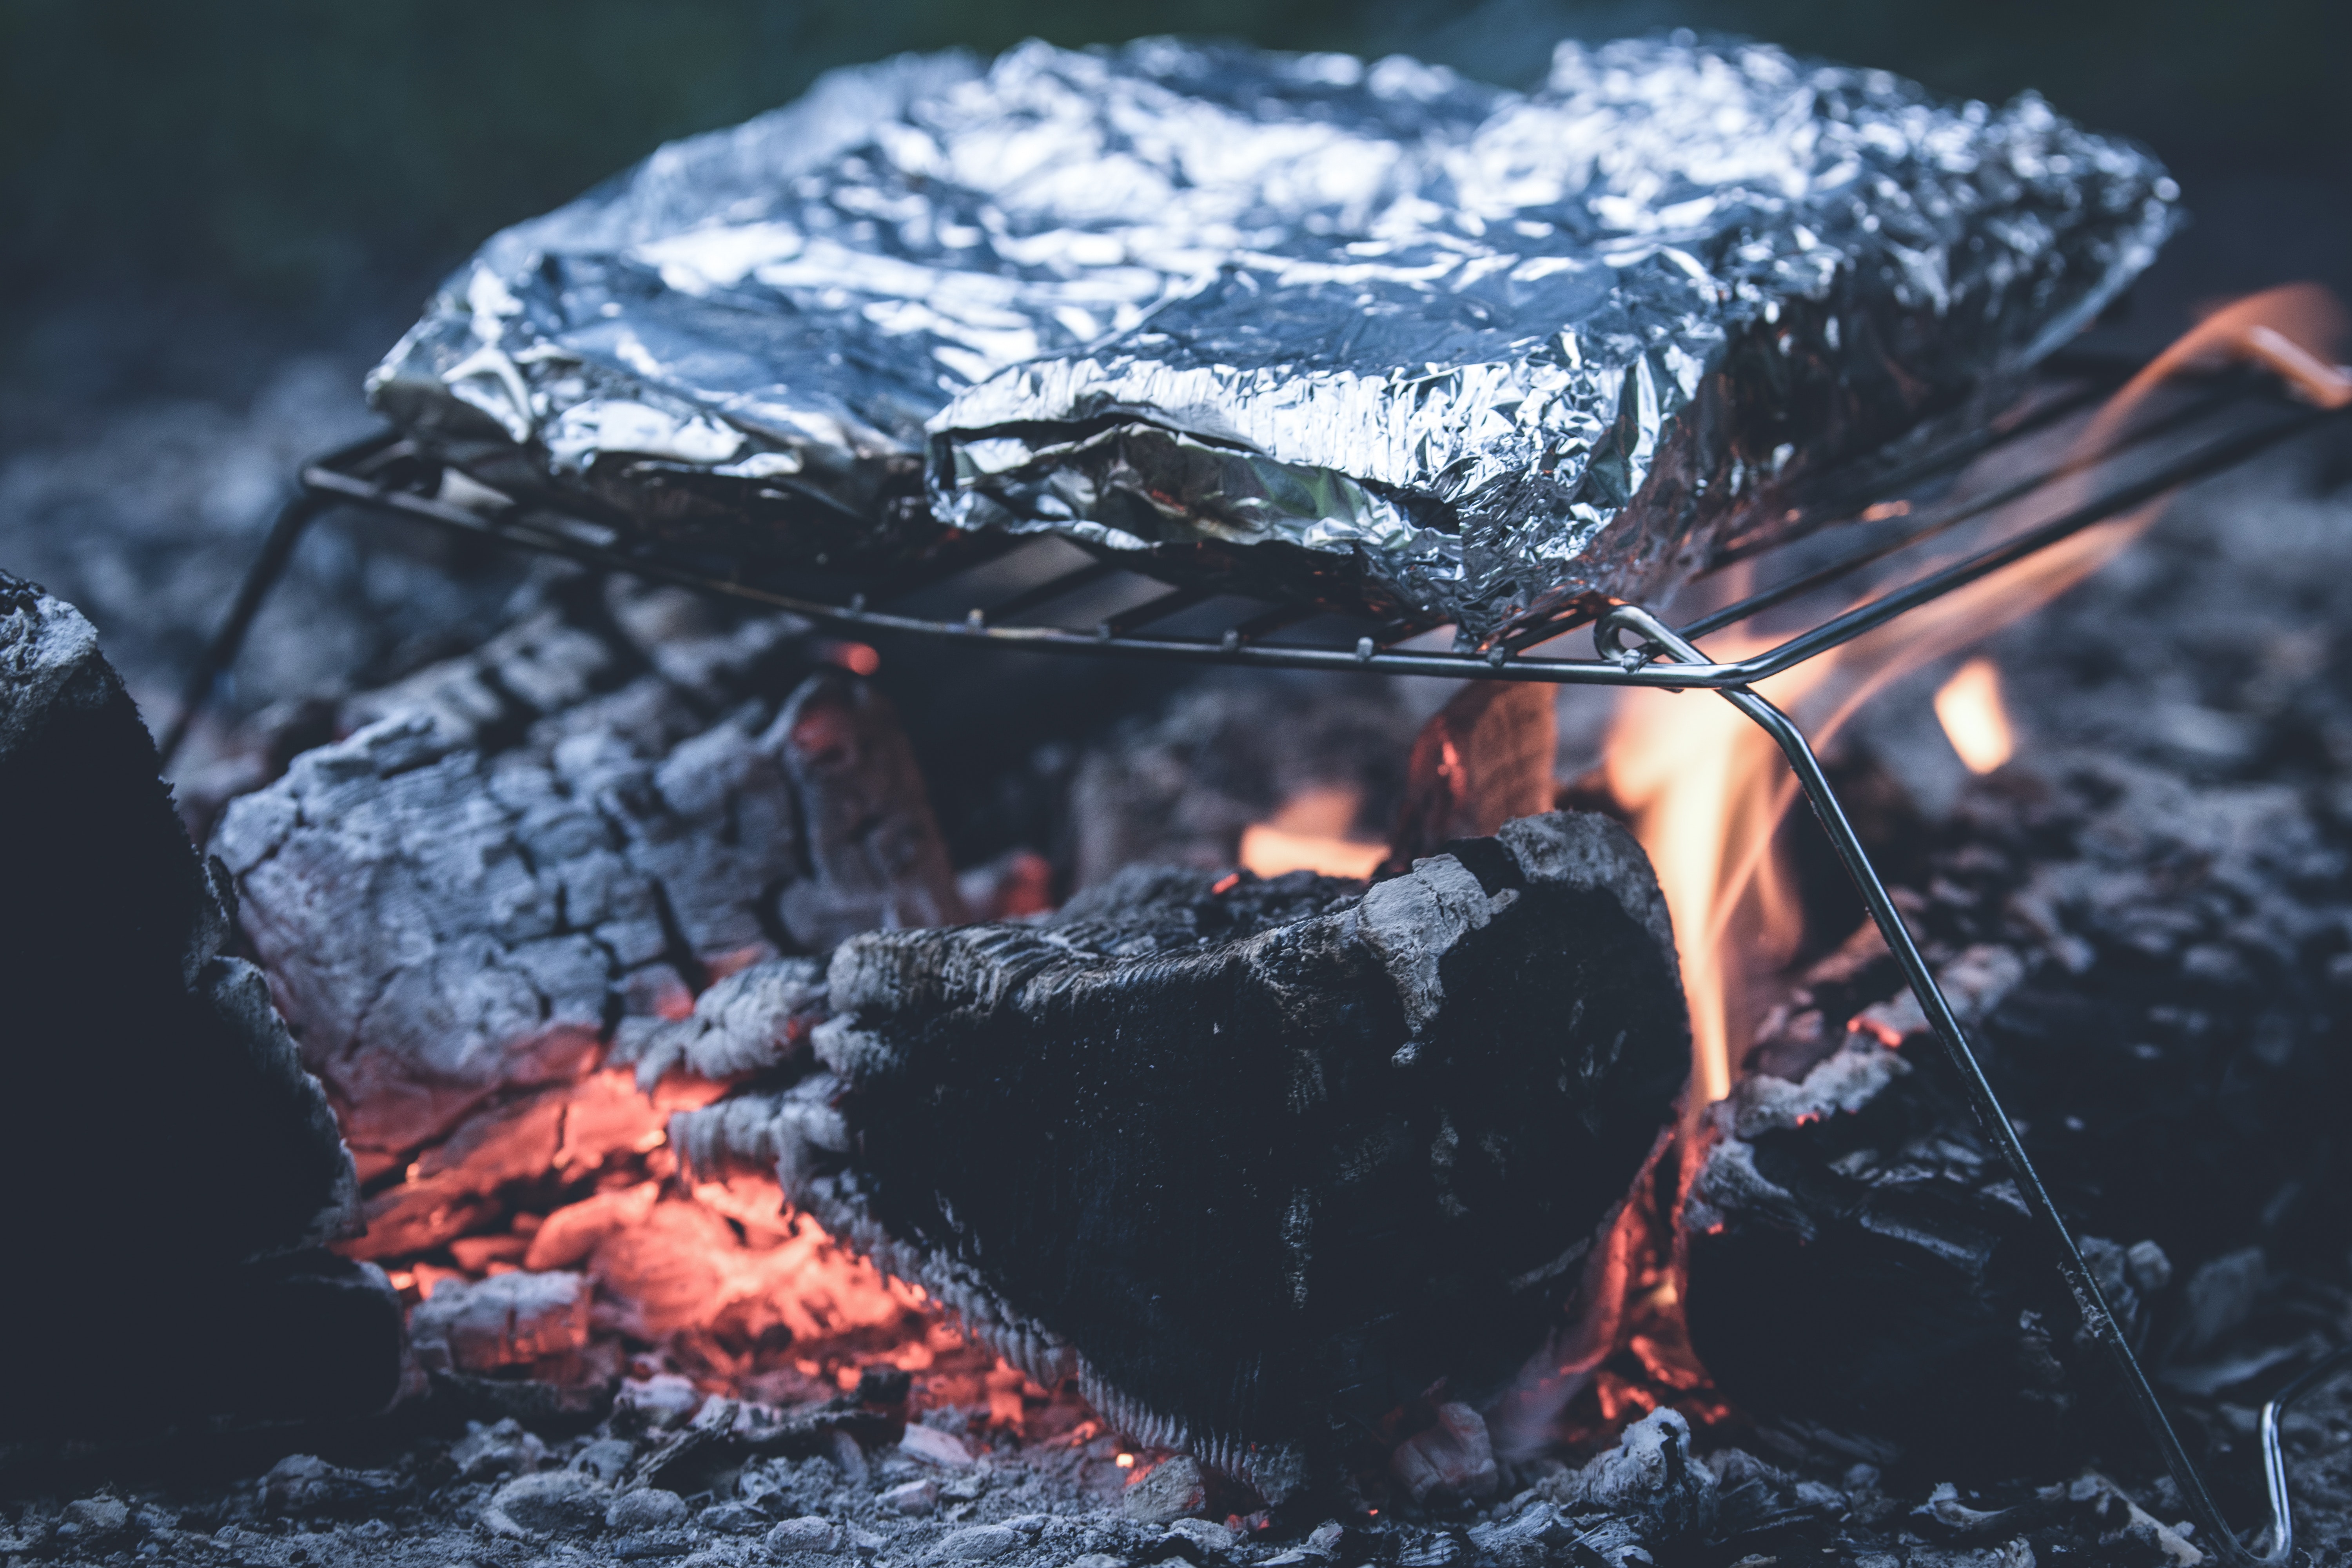 Foil Cooked on Metal Grill, Amber, Foil, Rock, Outdoors, HQ Photo